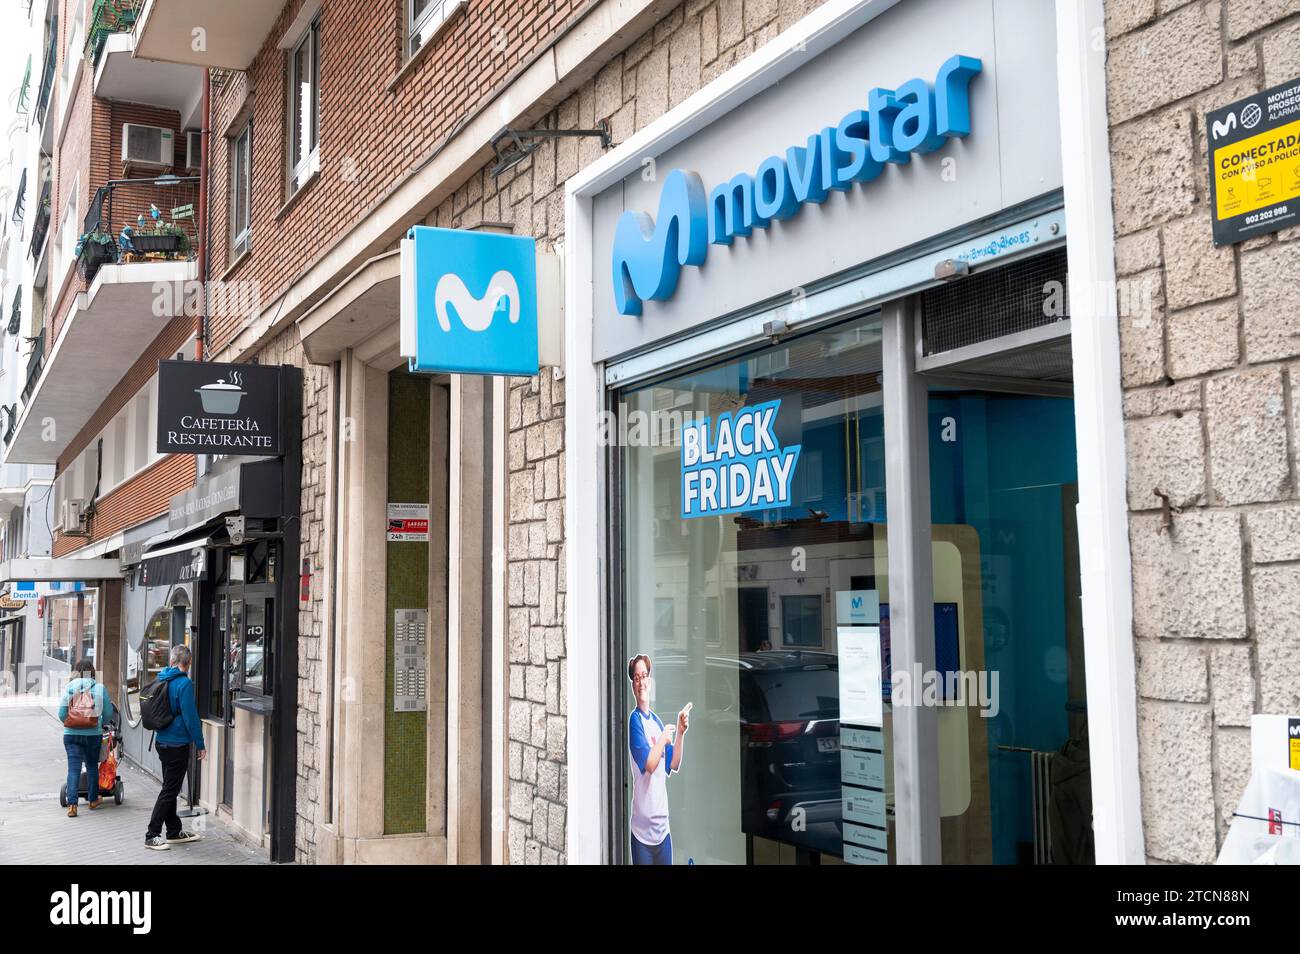 Spanish telecommunications brand owned by Telefonica and the largest mobile phone operator, Movistar, store seen in Spain. Stock Photo